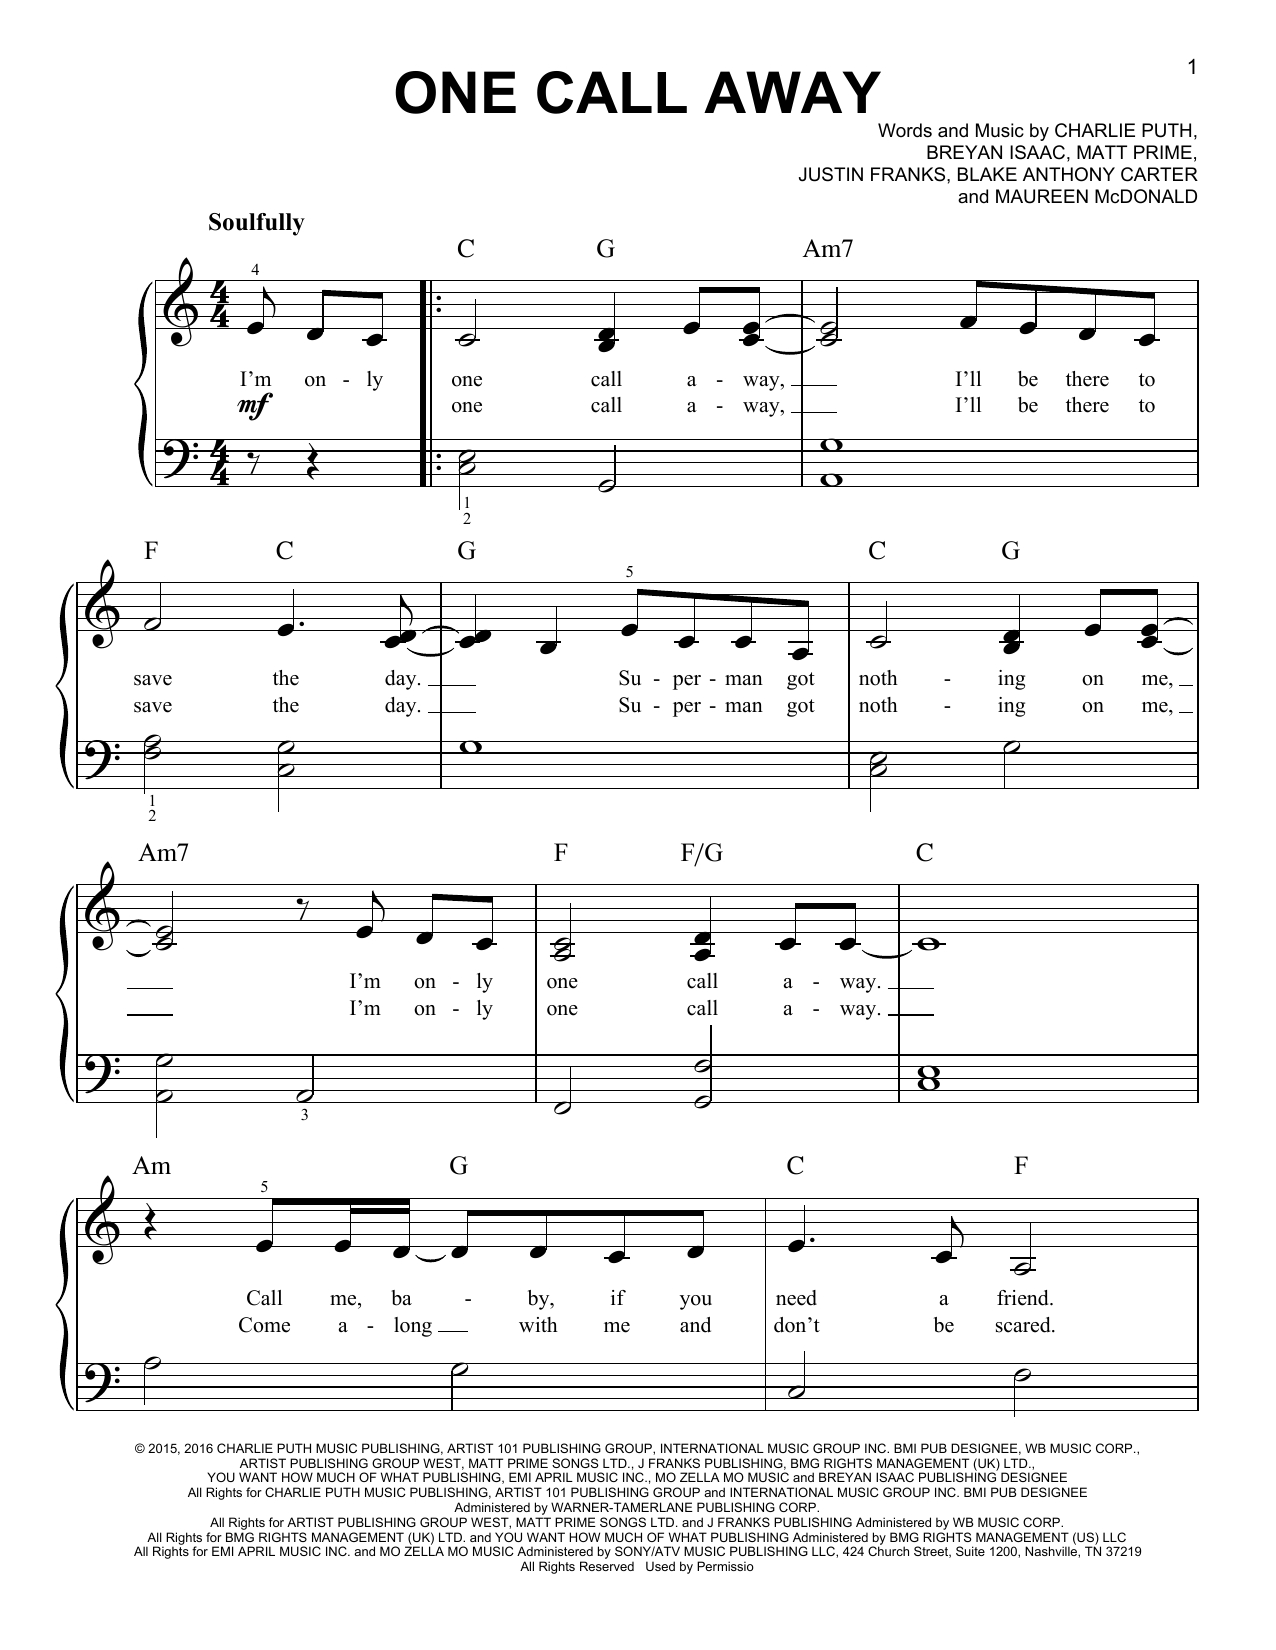 One Call Awaycharlie Puth Easy Piano Digital Sheet Music | Nuty - Free Printable Sheet Music For Piano Beginners Popular Songs